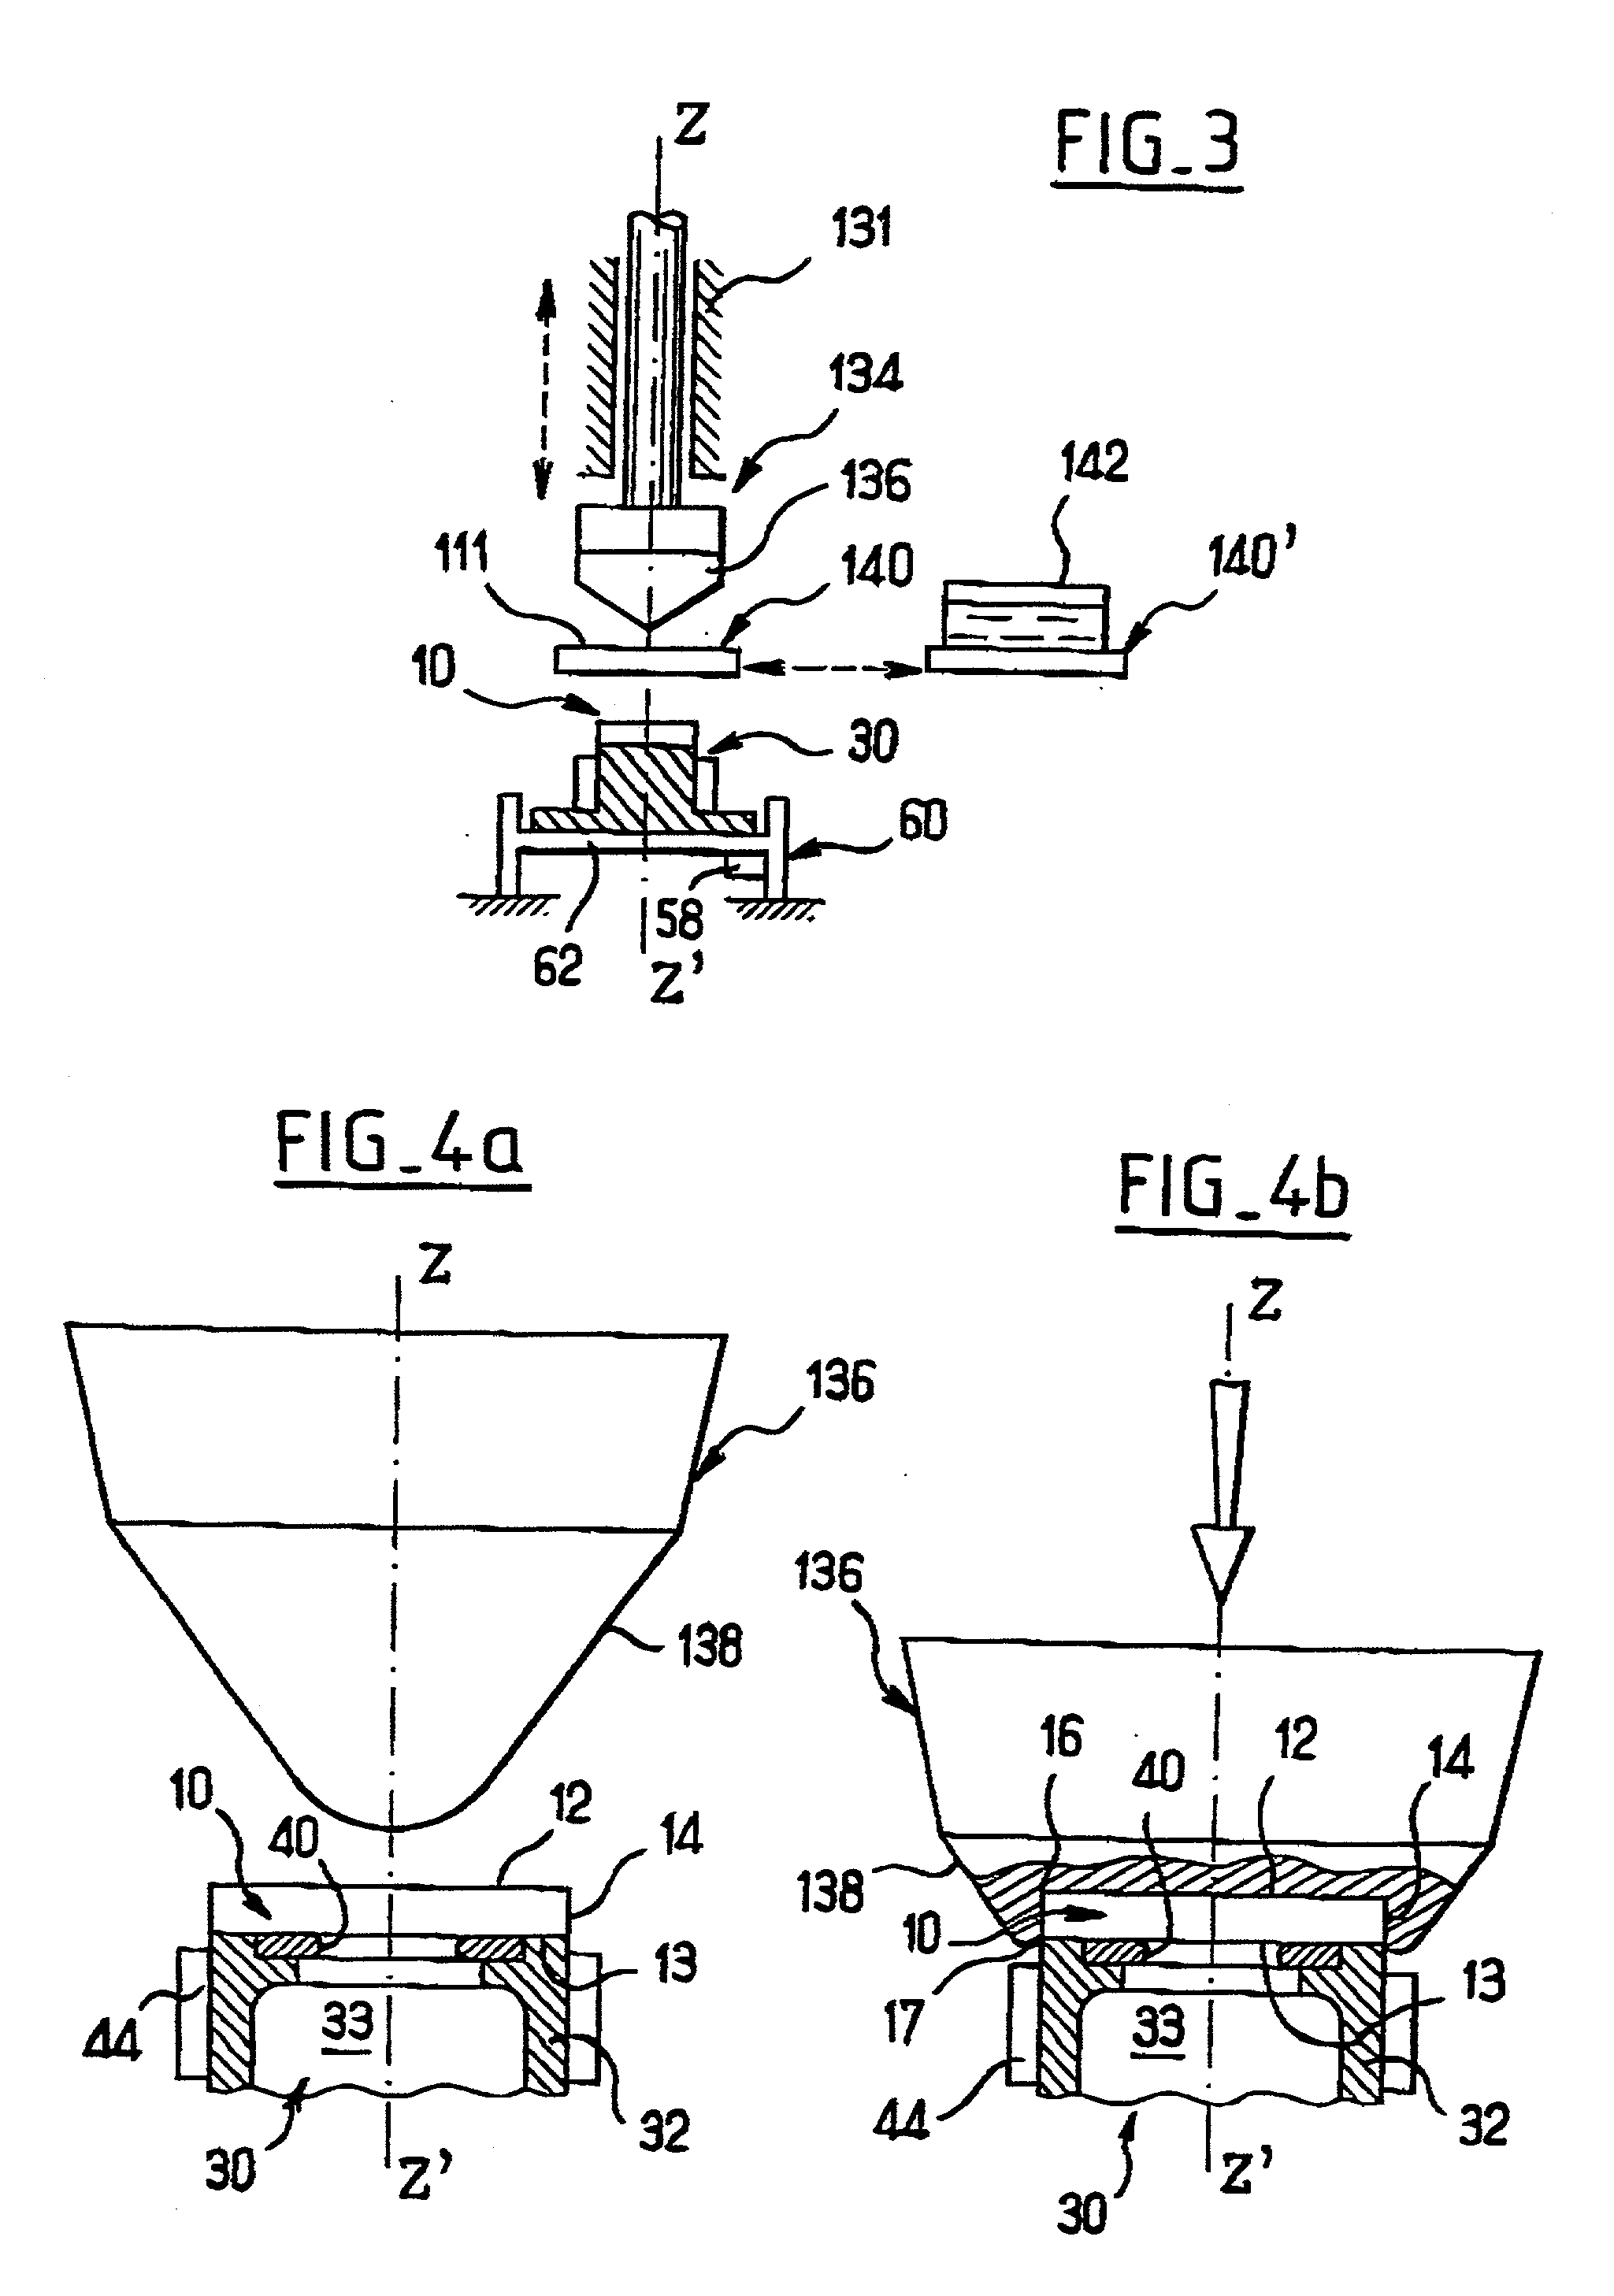 Chip holding arrangement, pad printing system incorporating the arrangement, and method of pad pringting a chip using the arrangement